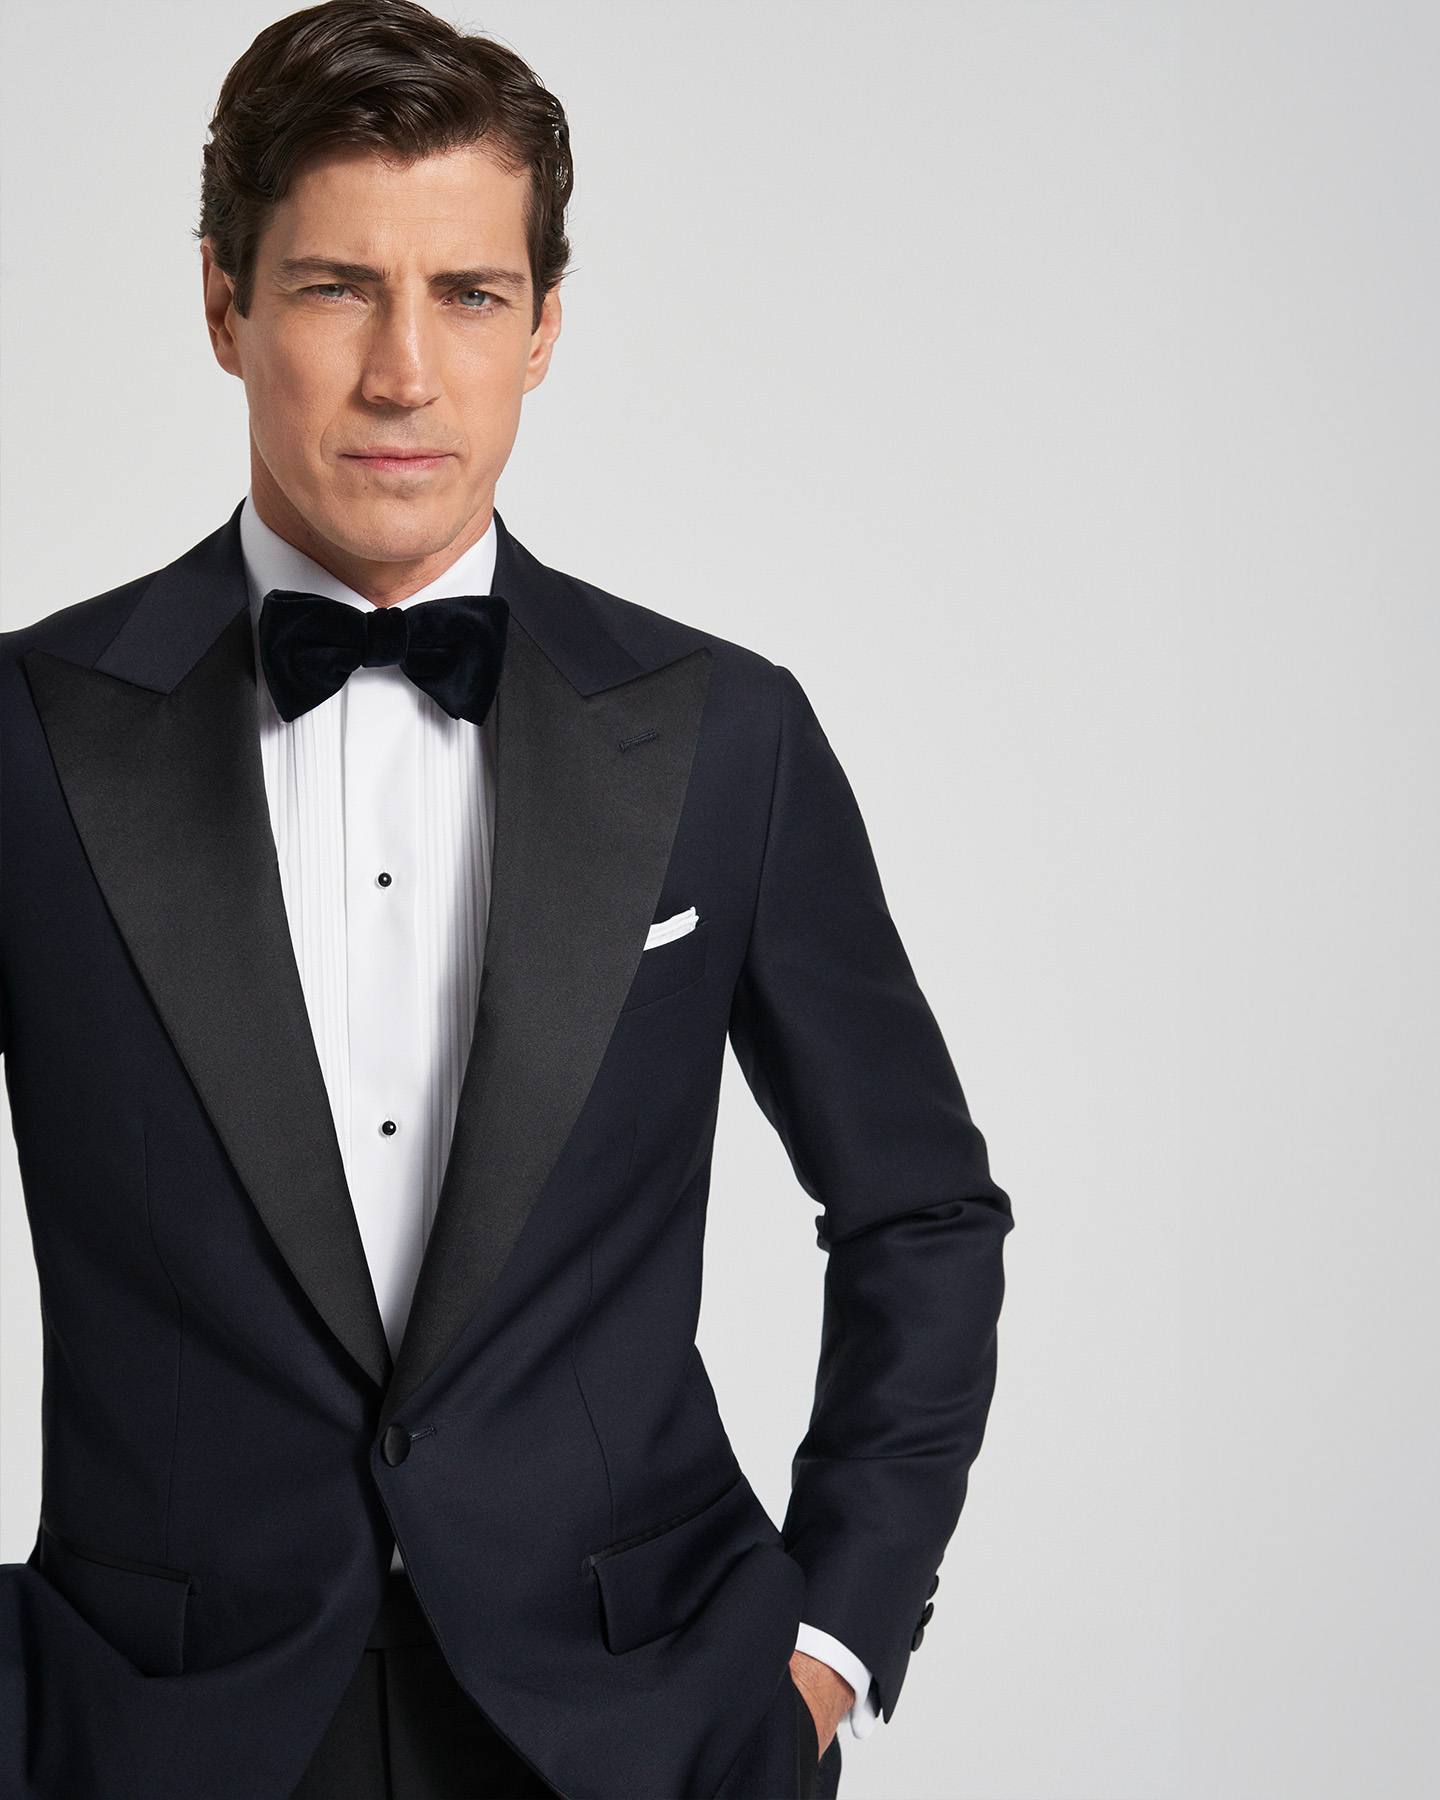 THE WHITE TUXEDO/DINNER JACKET - HOW AND WHEN TO WEAR THE ICONIC GARMENT 